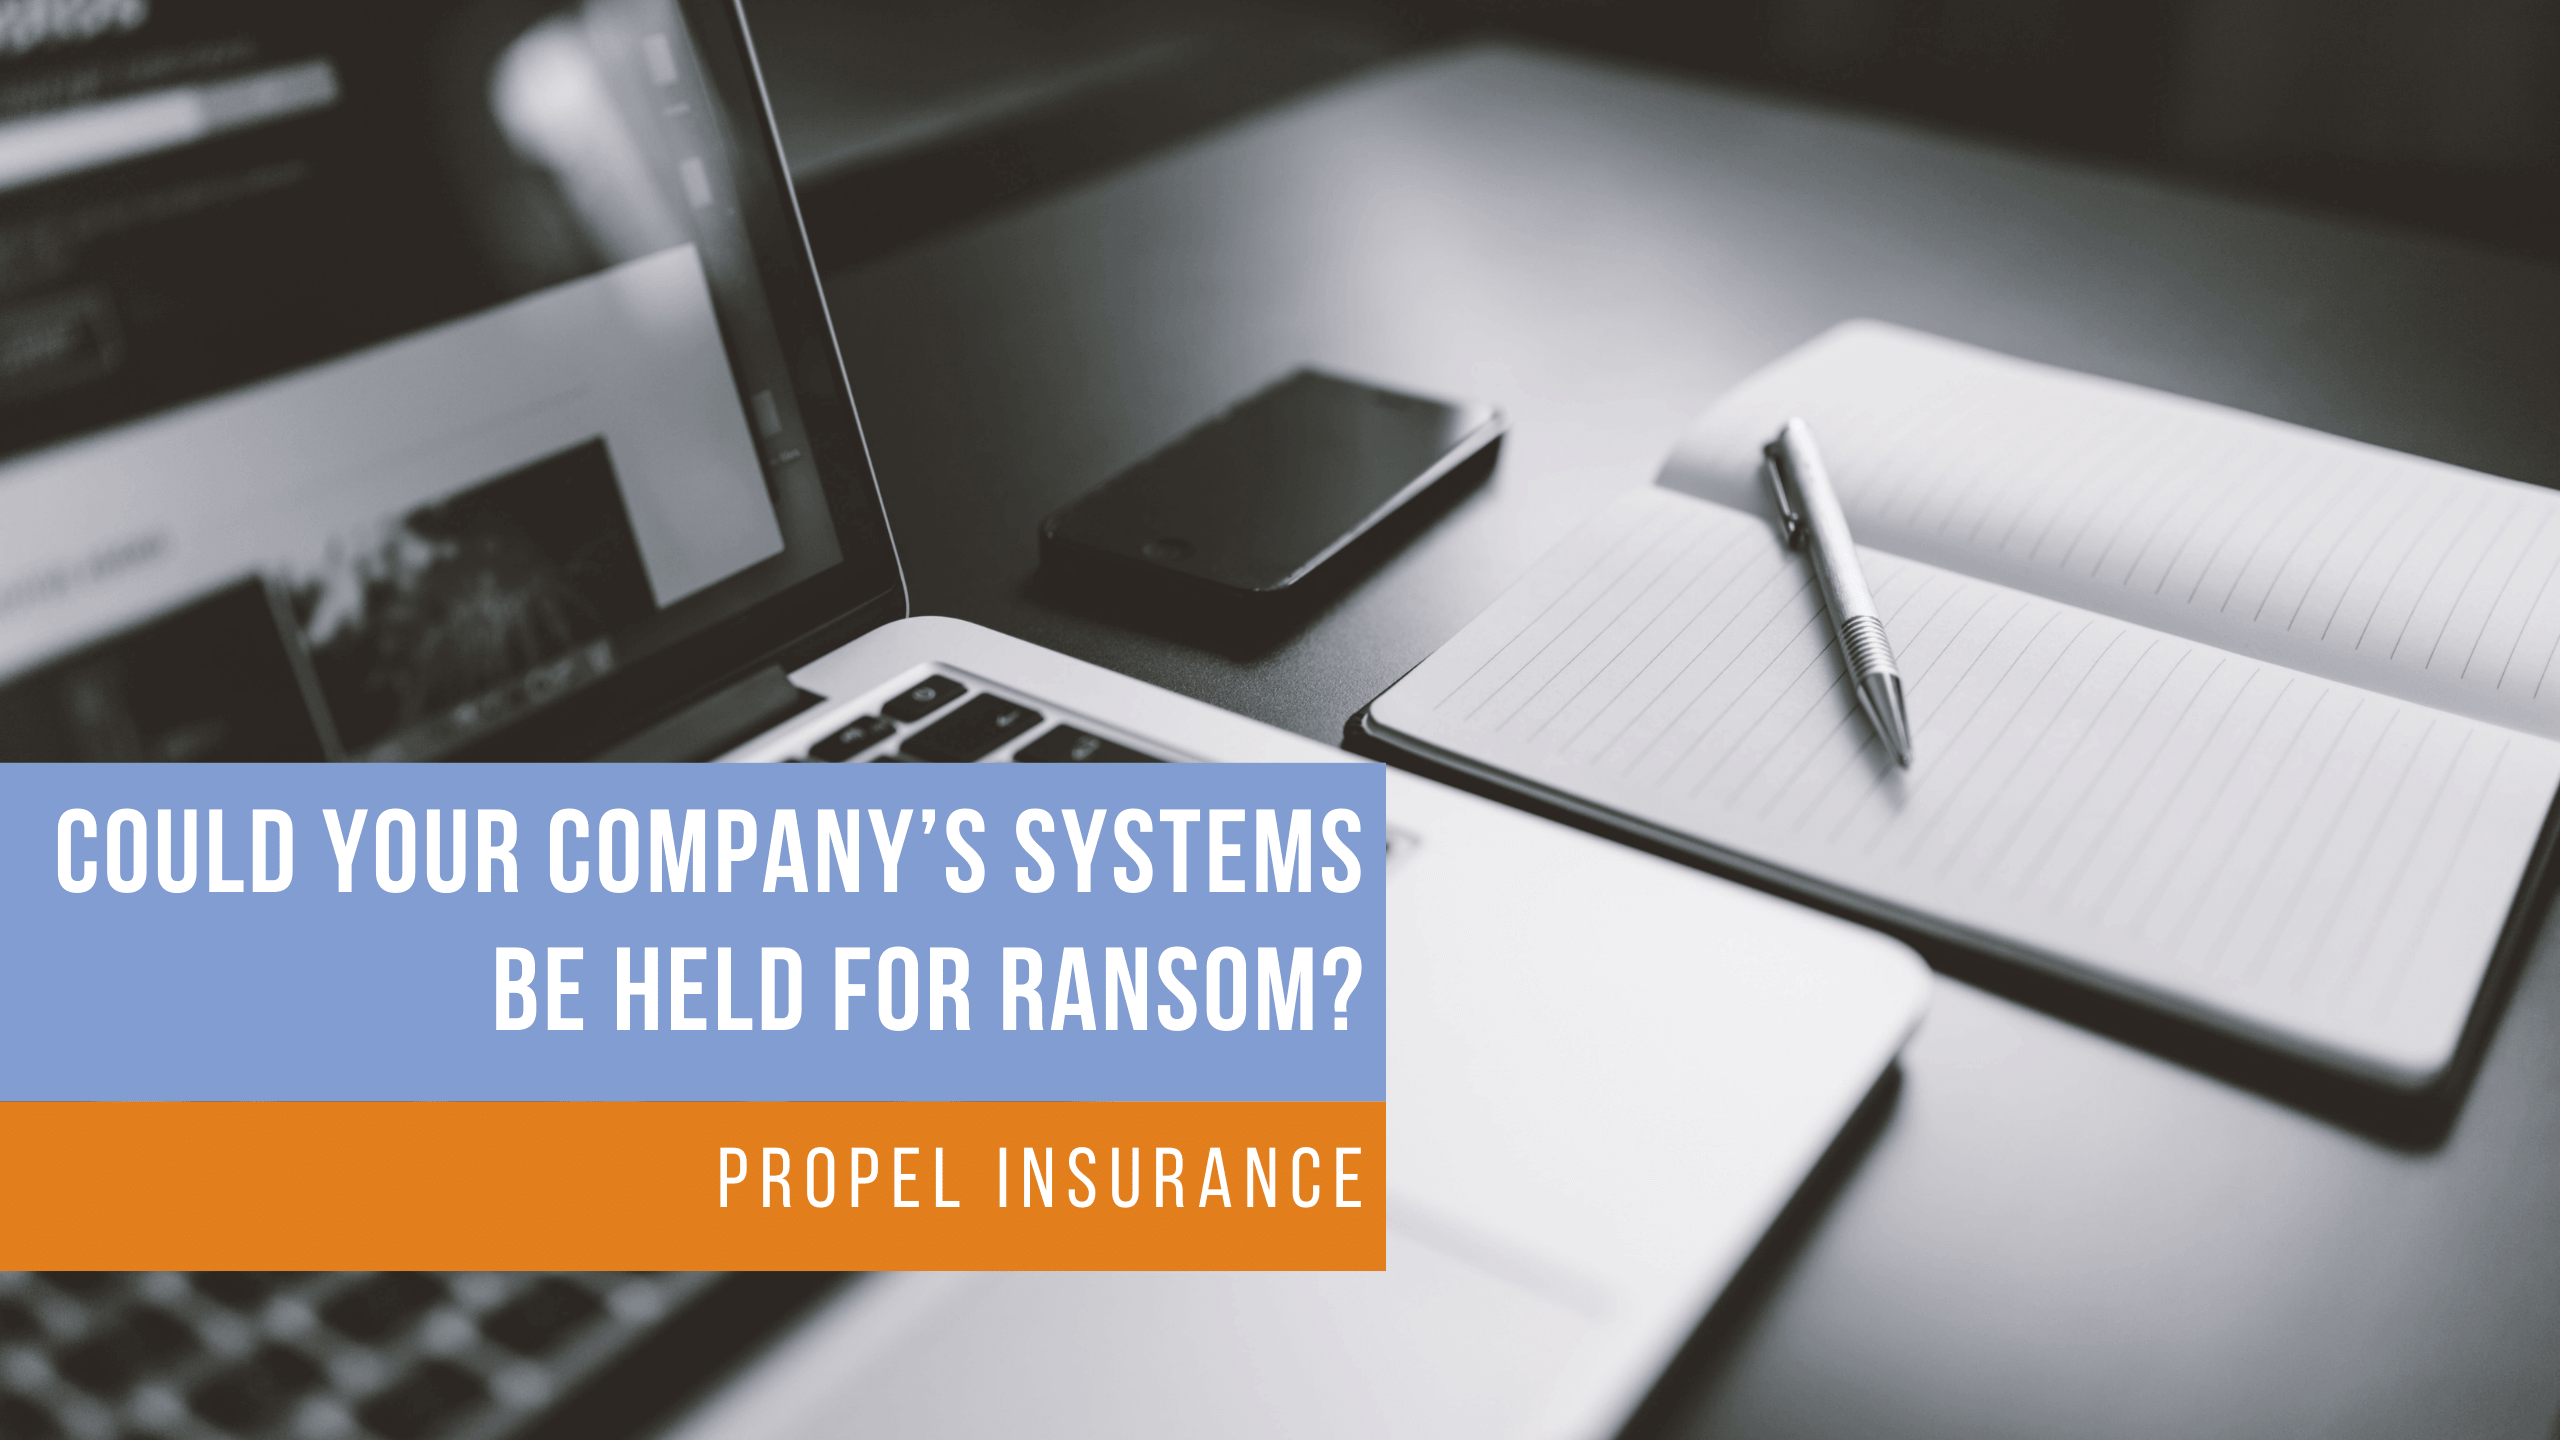 Could Your Company’s Systems Be Held for Ransom?